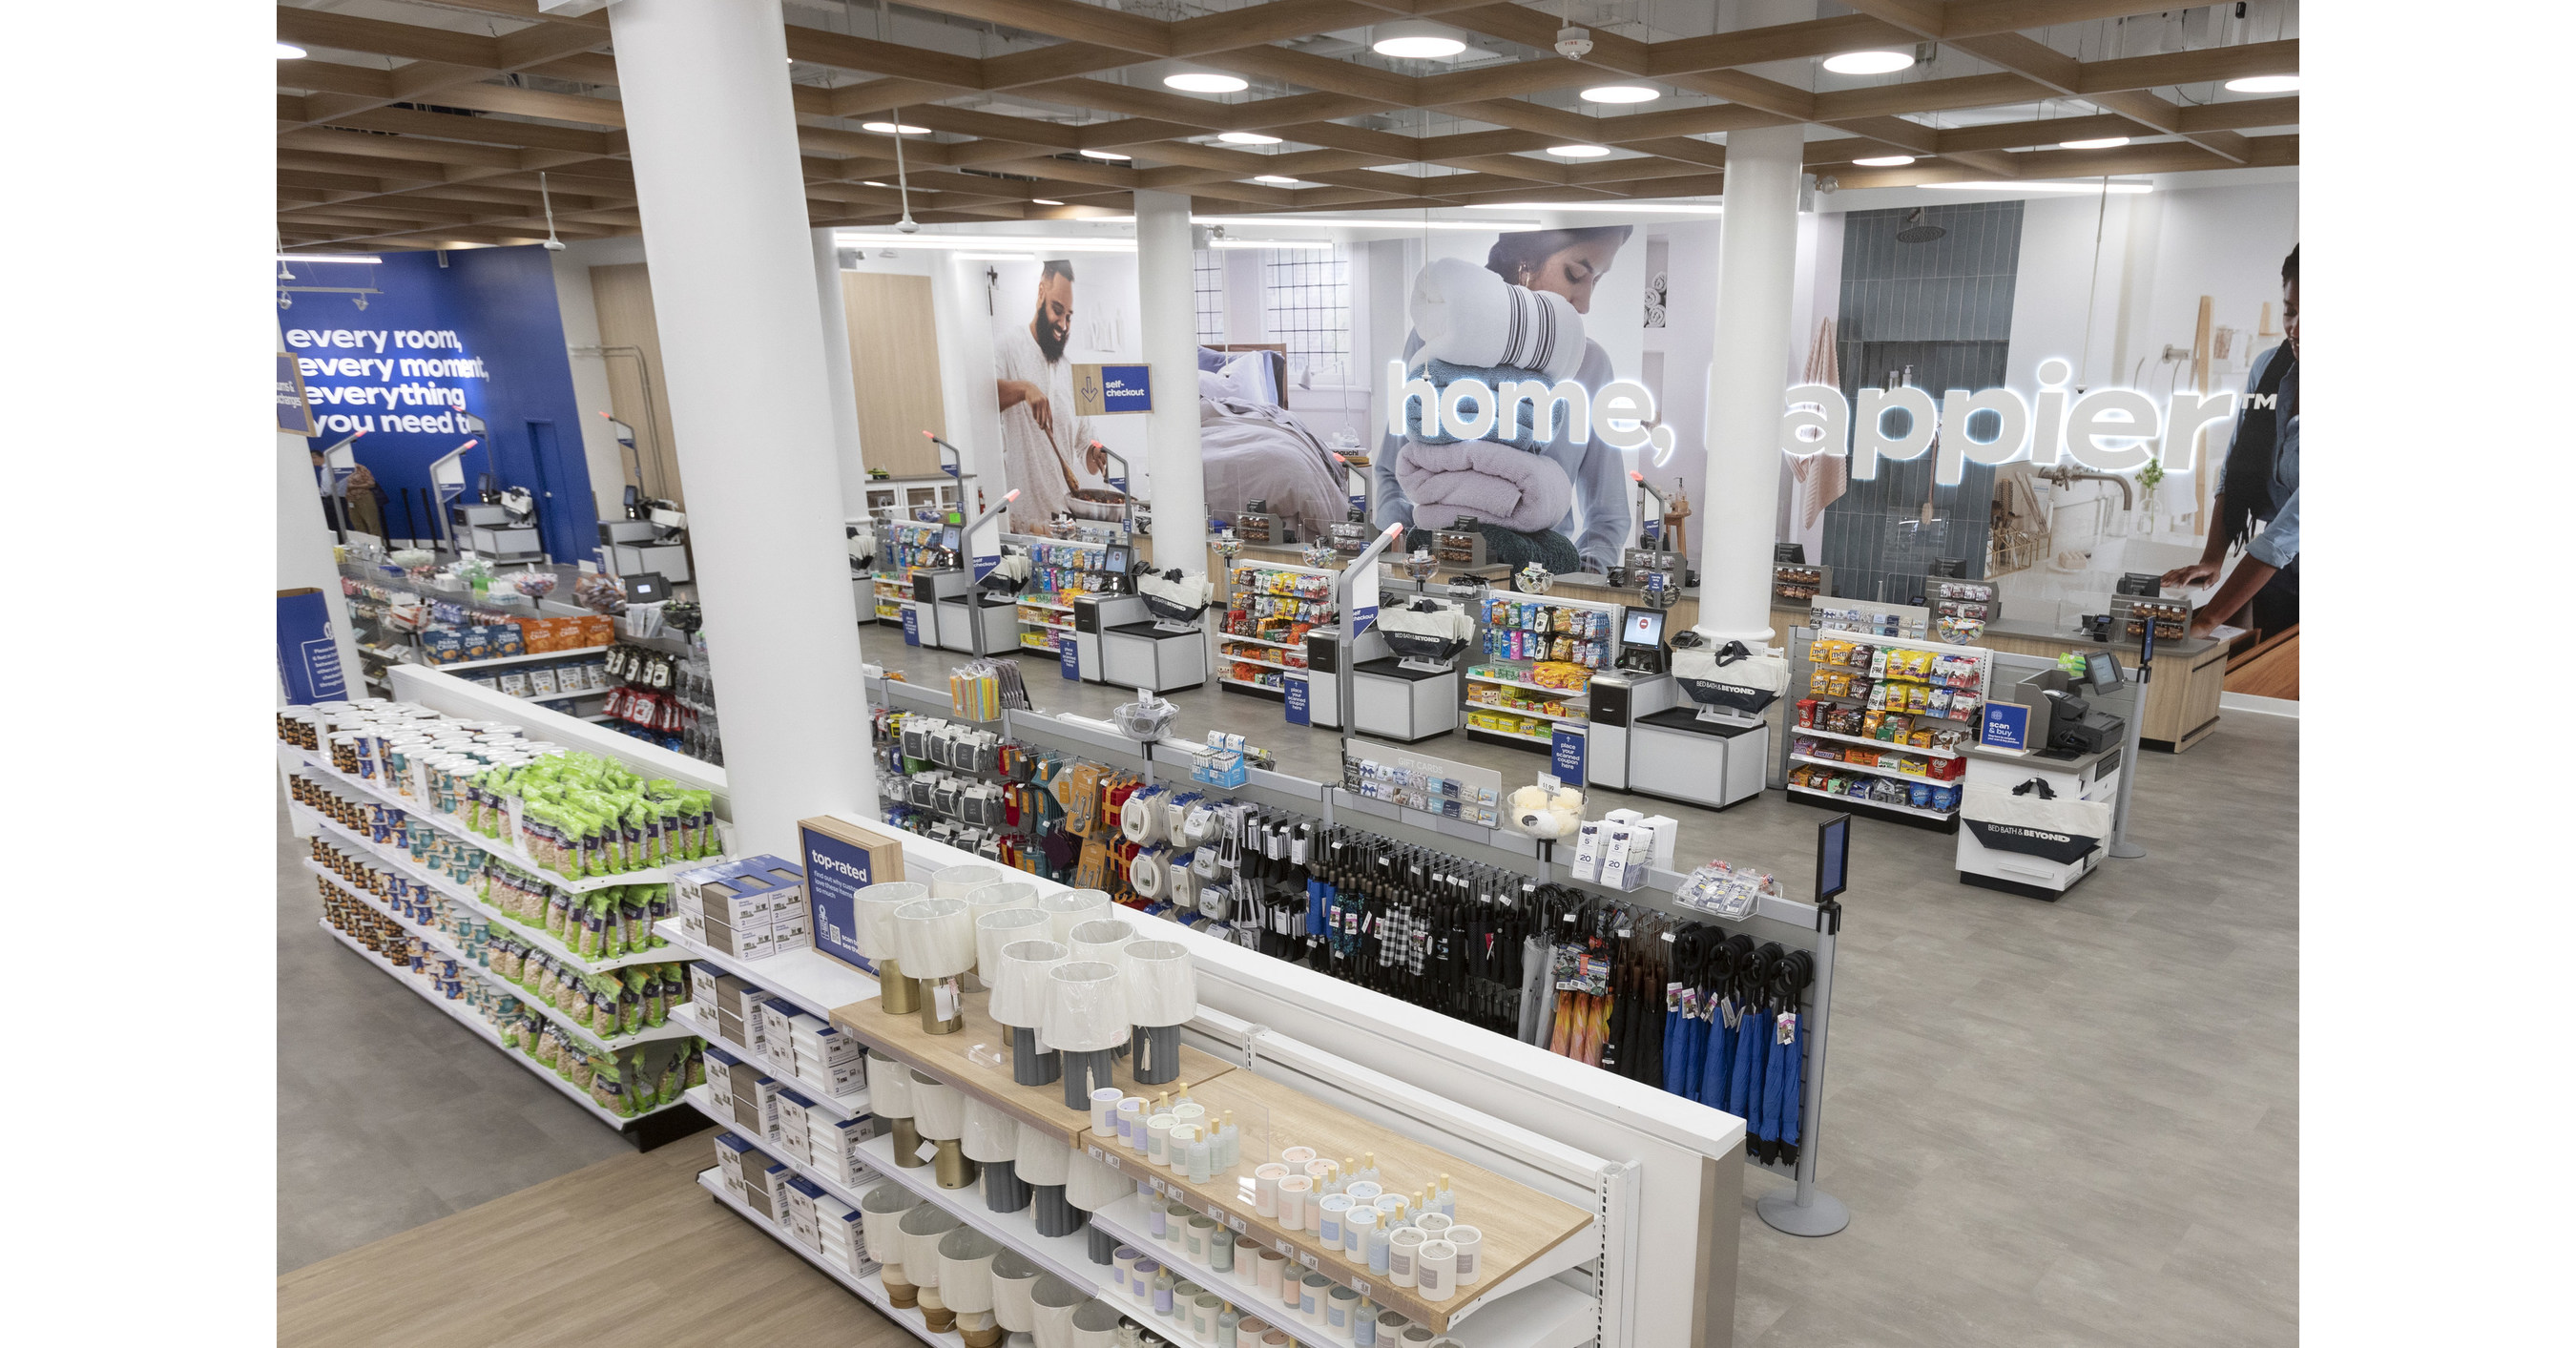 Bed Bath Beyonds Redesigned And Transformed Flagship In New York City To Give Customers A Modernized Omni Always Shopping Experience